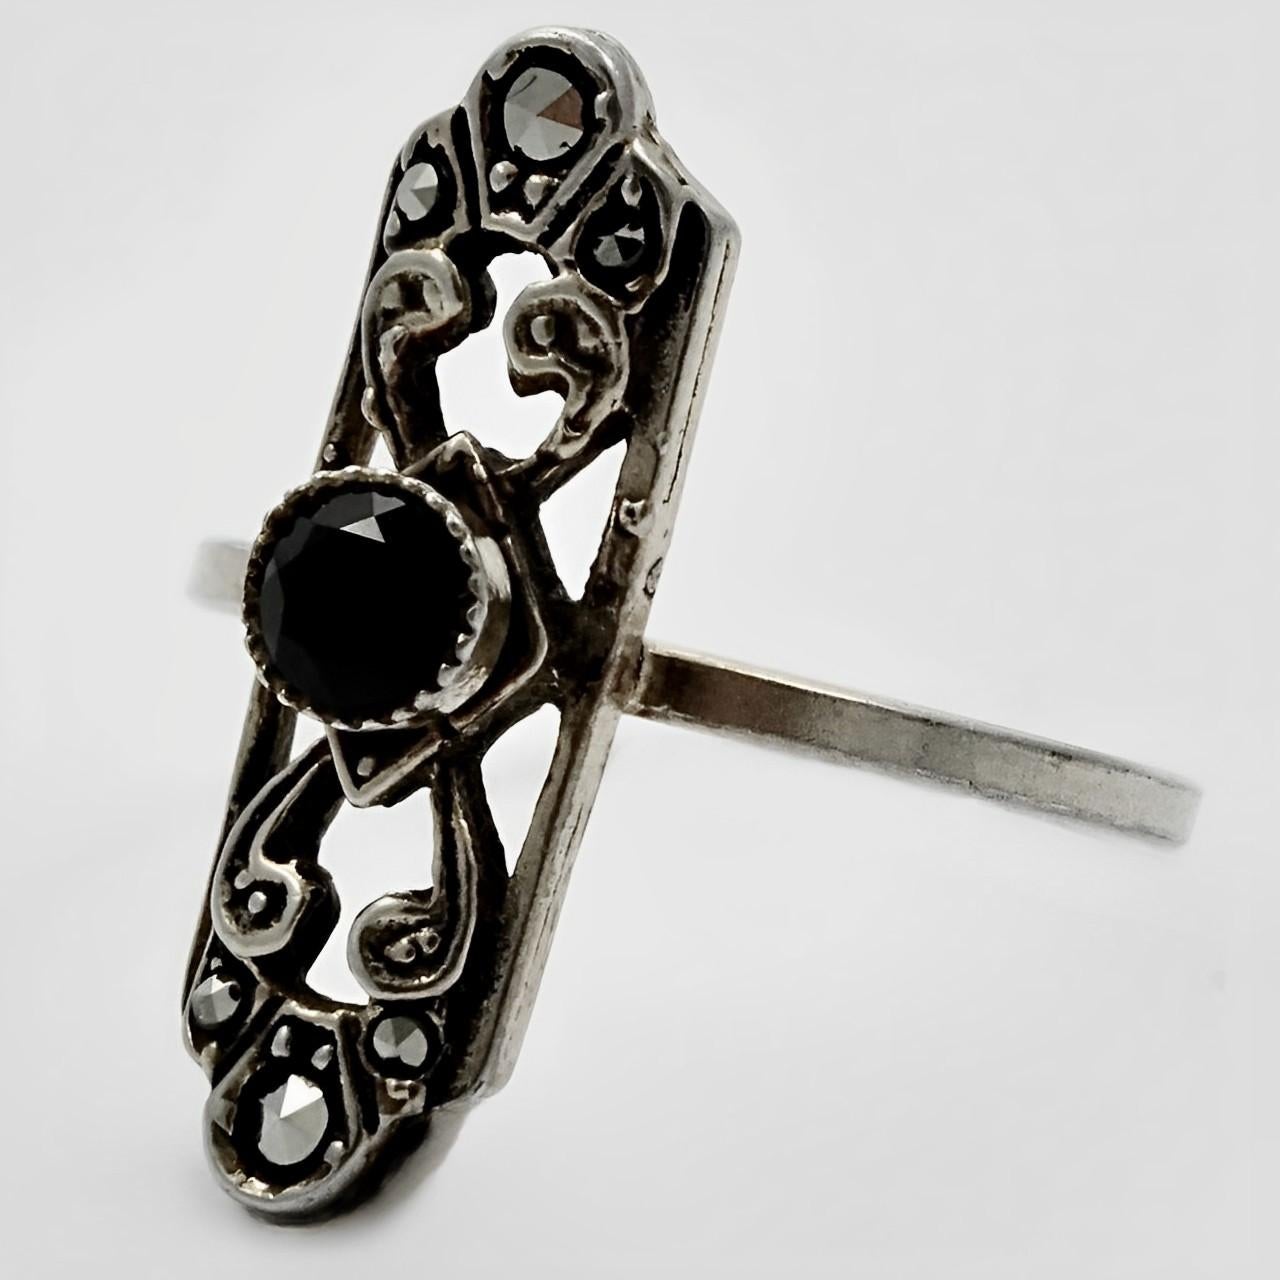 Beautiful 835 silver Art Deco ring, featuring a centre black glass faceted stone and marcasites set into black enamel. Ring size UK O 1/2, US 7 1/4, inside diameter 1.85 cm / .72 inch.

This lovely silver vintage ring is circa 1930s.